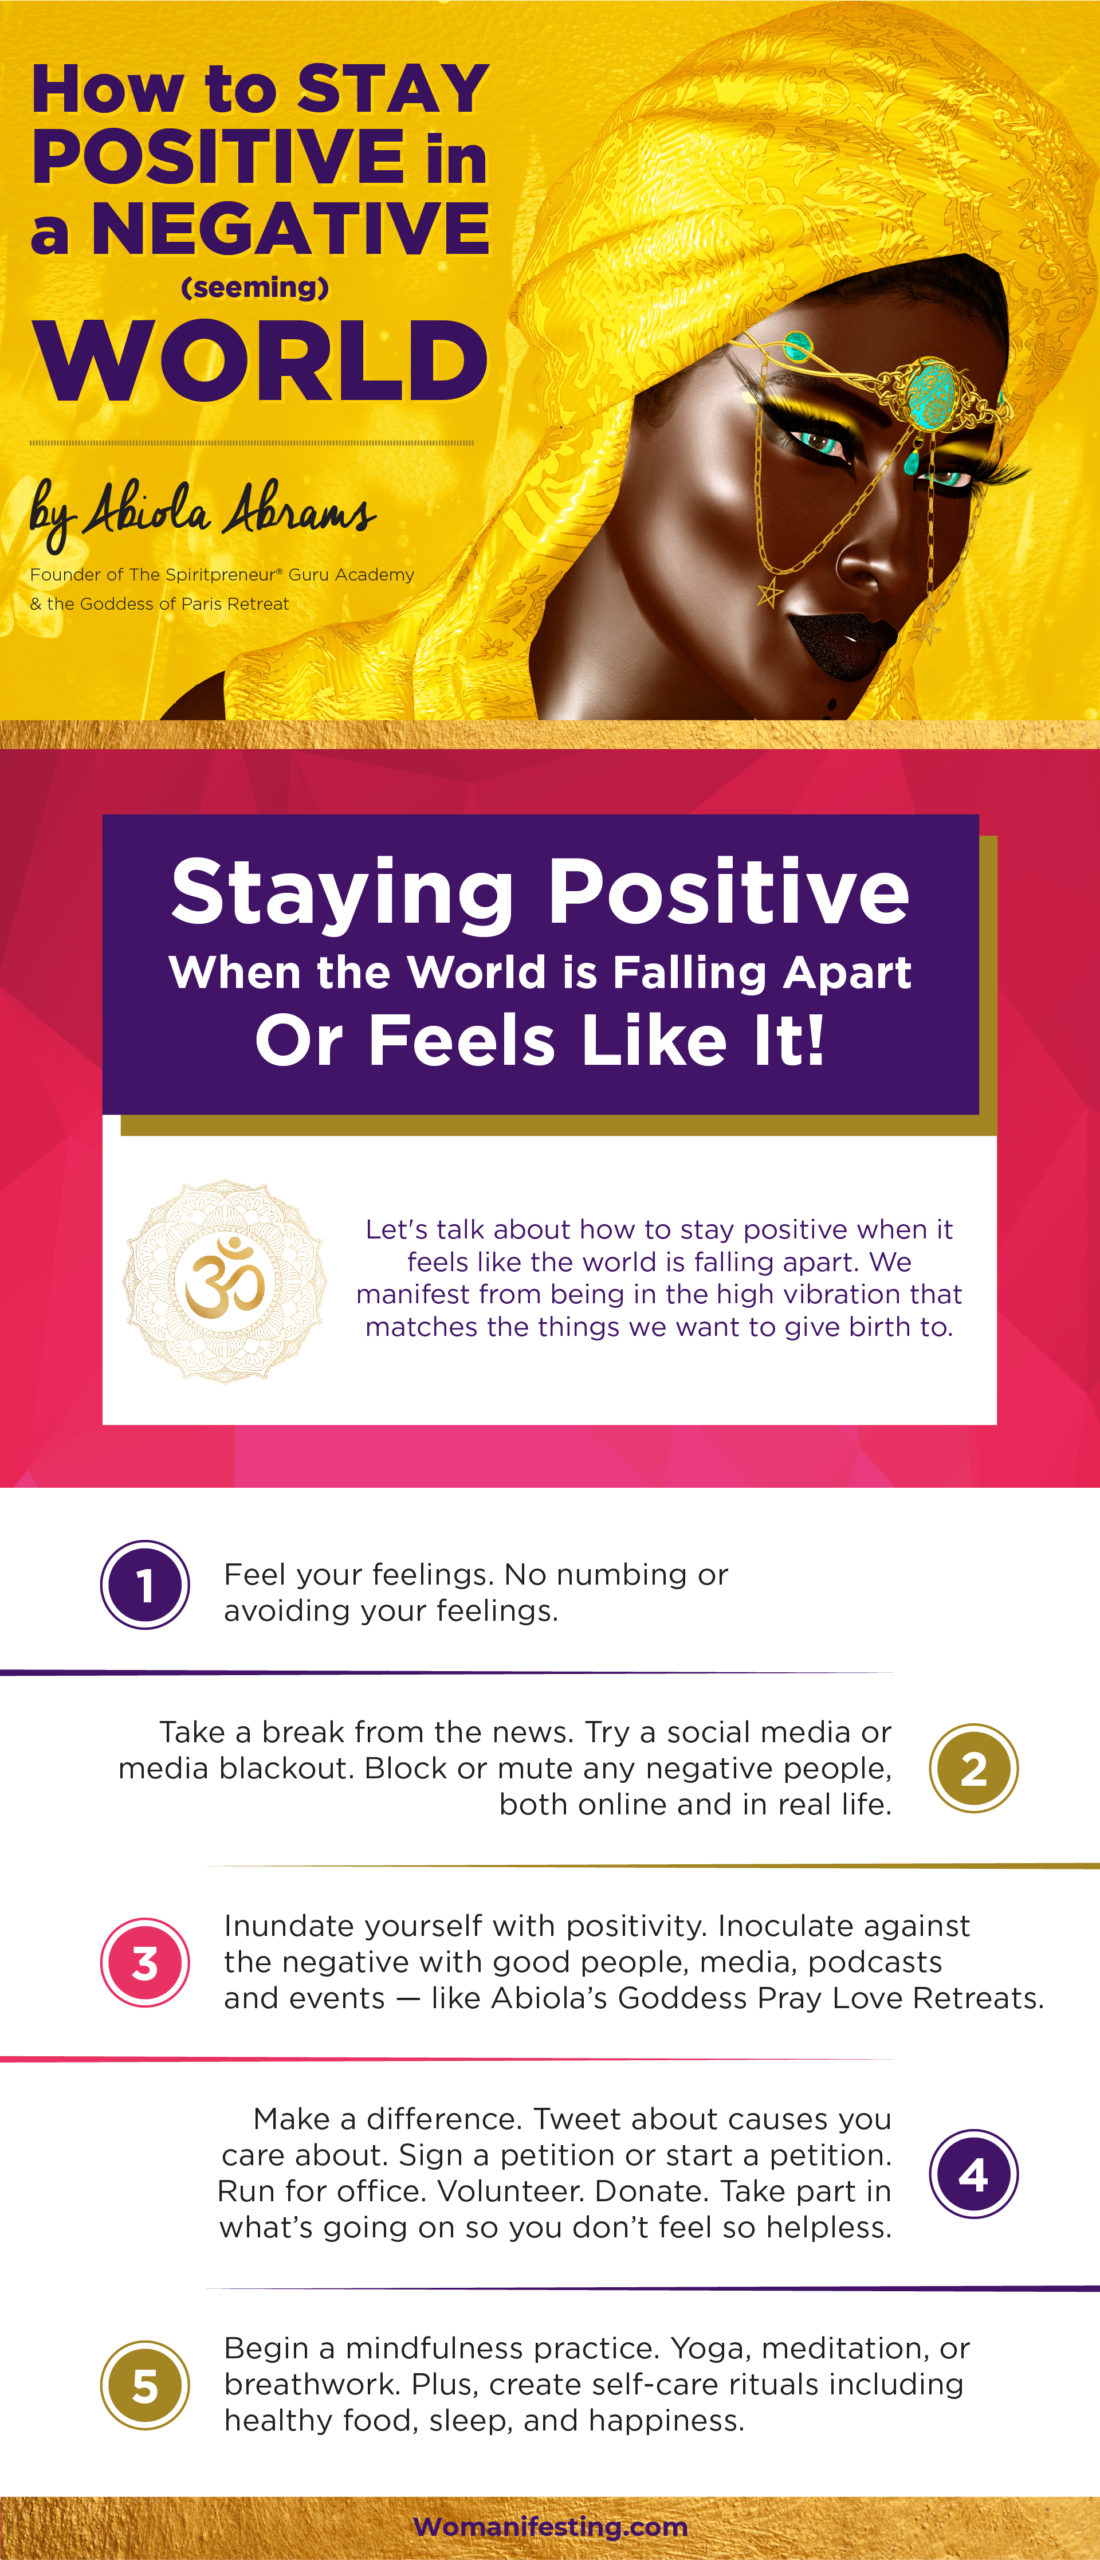 How to Stay Positive in a Negative World